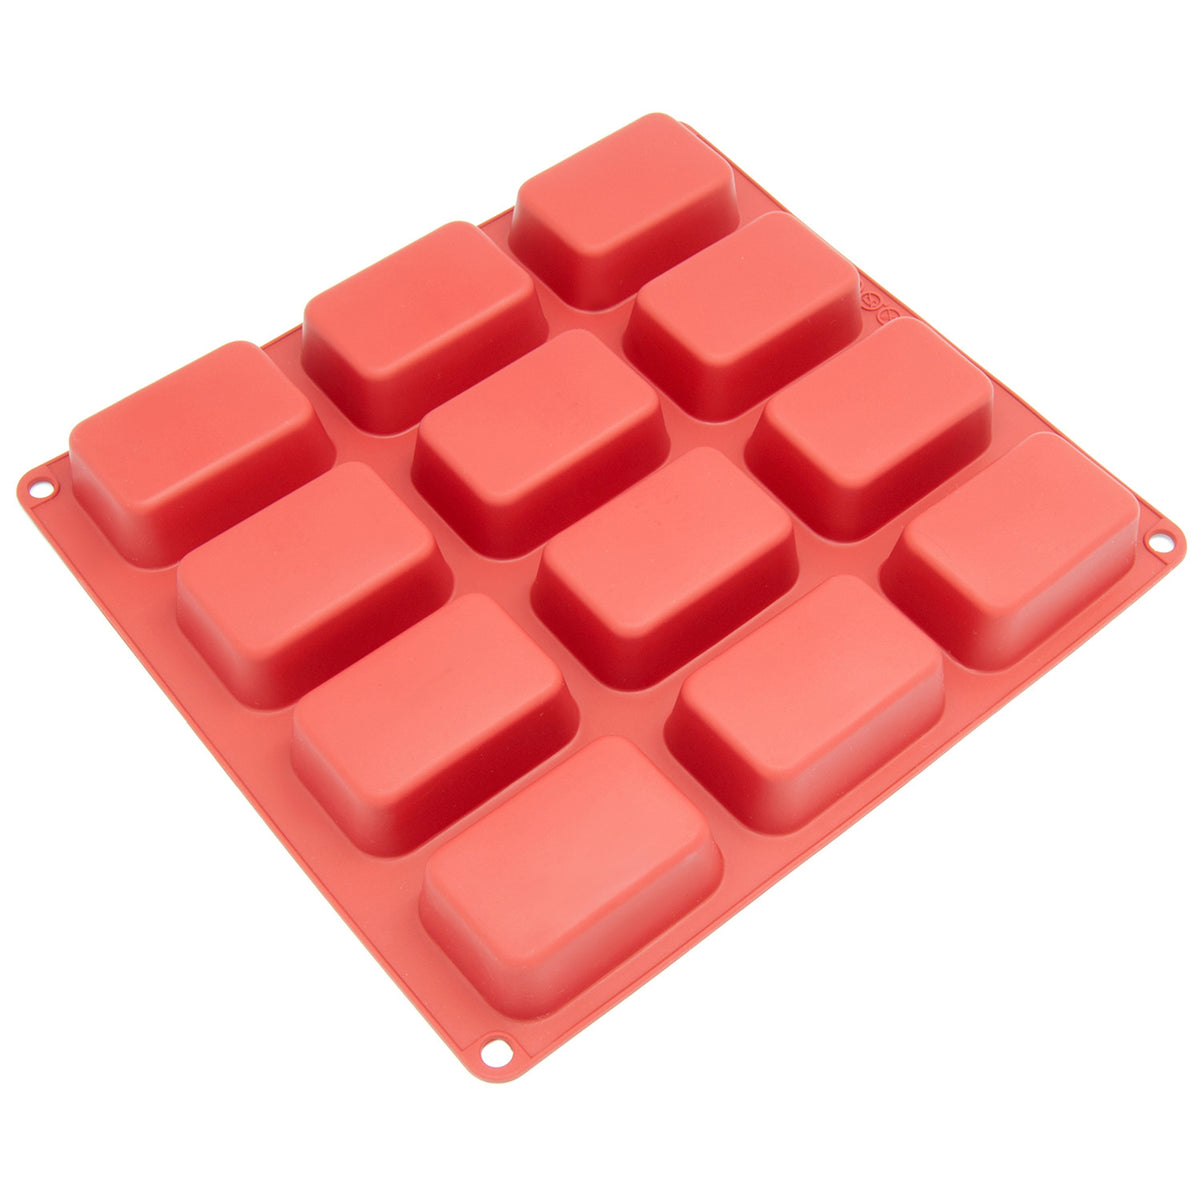 Silicone Muffin Pan - 12 Cups Regular Silicone Cupcake Pan, Non-stick  Silicone Great for Making Muffin Cakes, Tart, Bread - BPA Free and  Dishwasher Safe,Red 